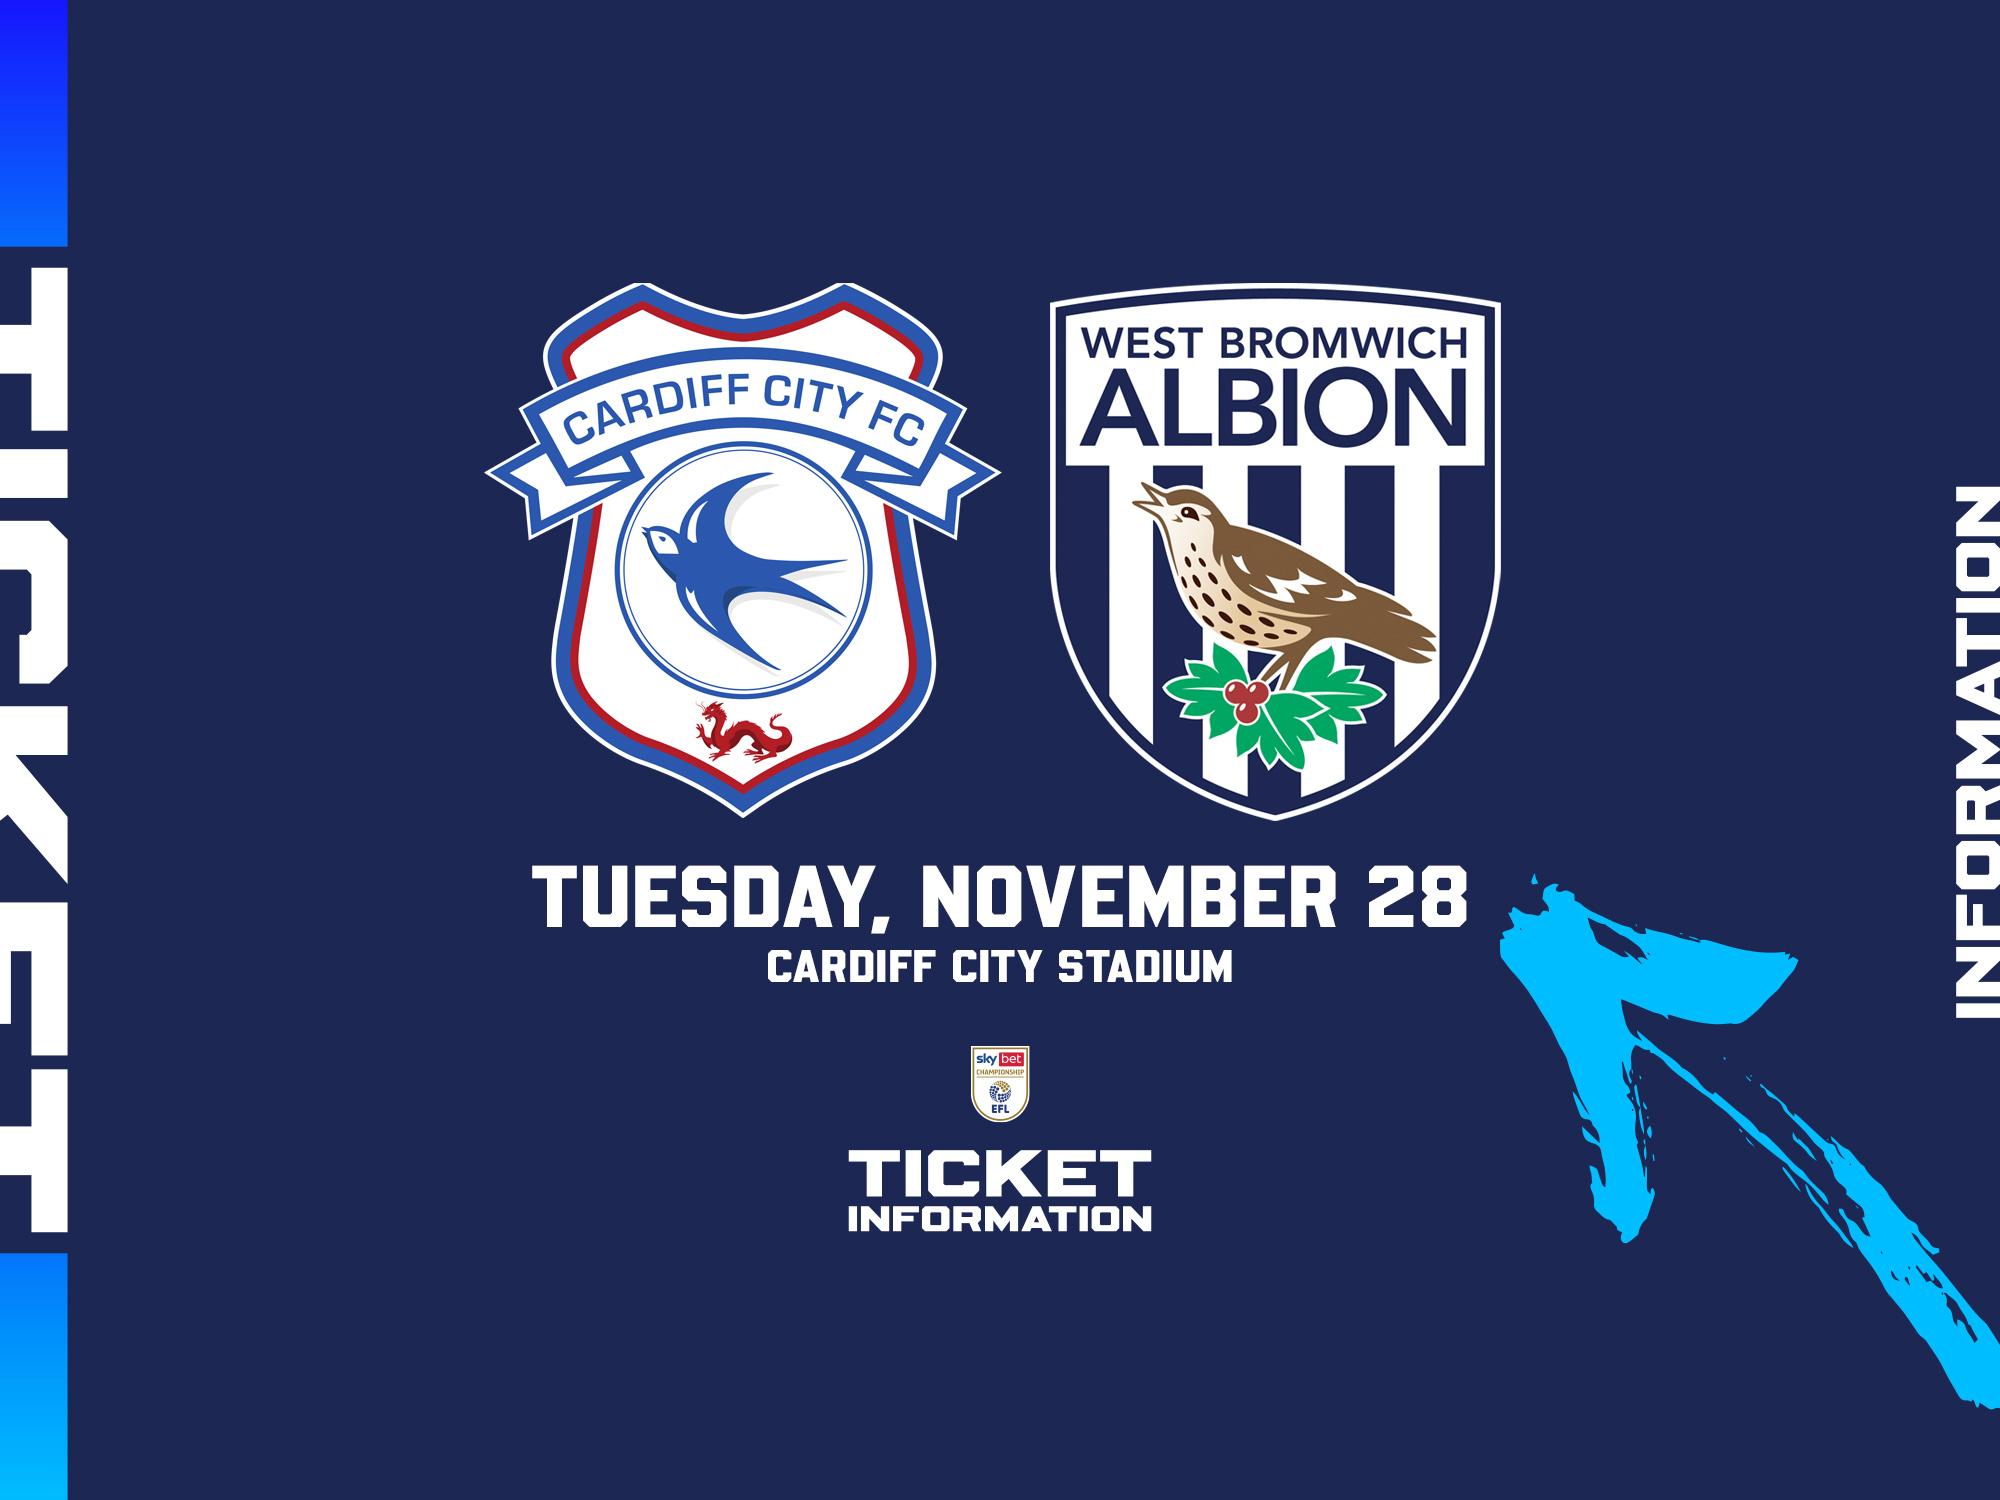 A ticket graphic displaying information for Albion's game at Cardiff